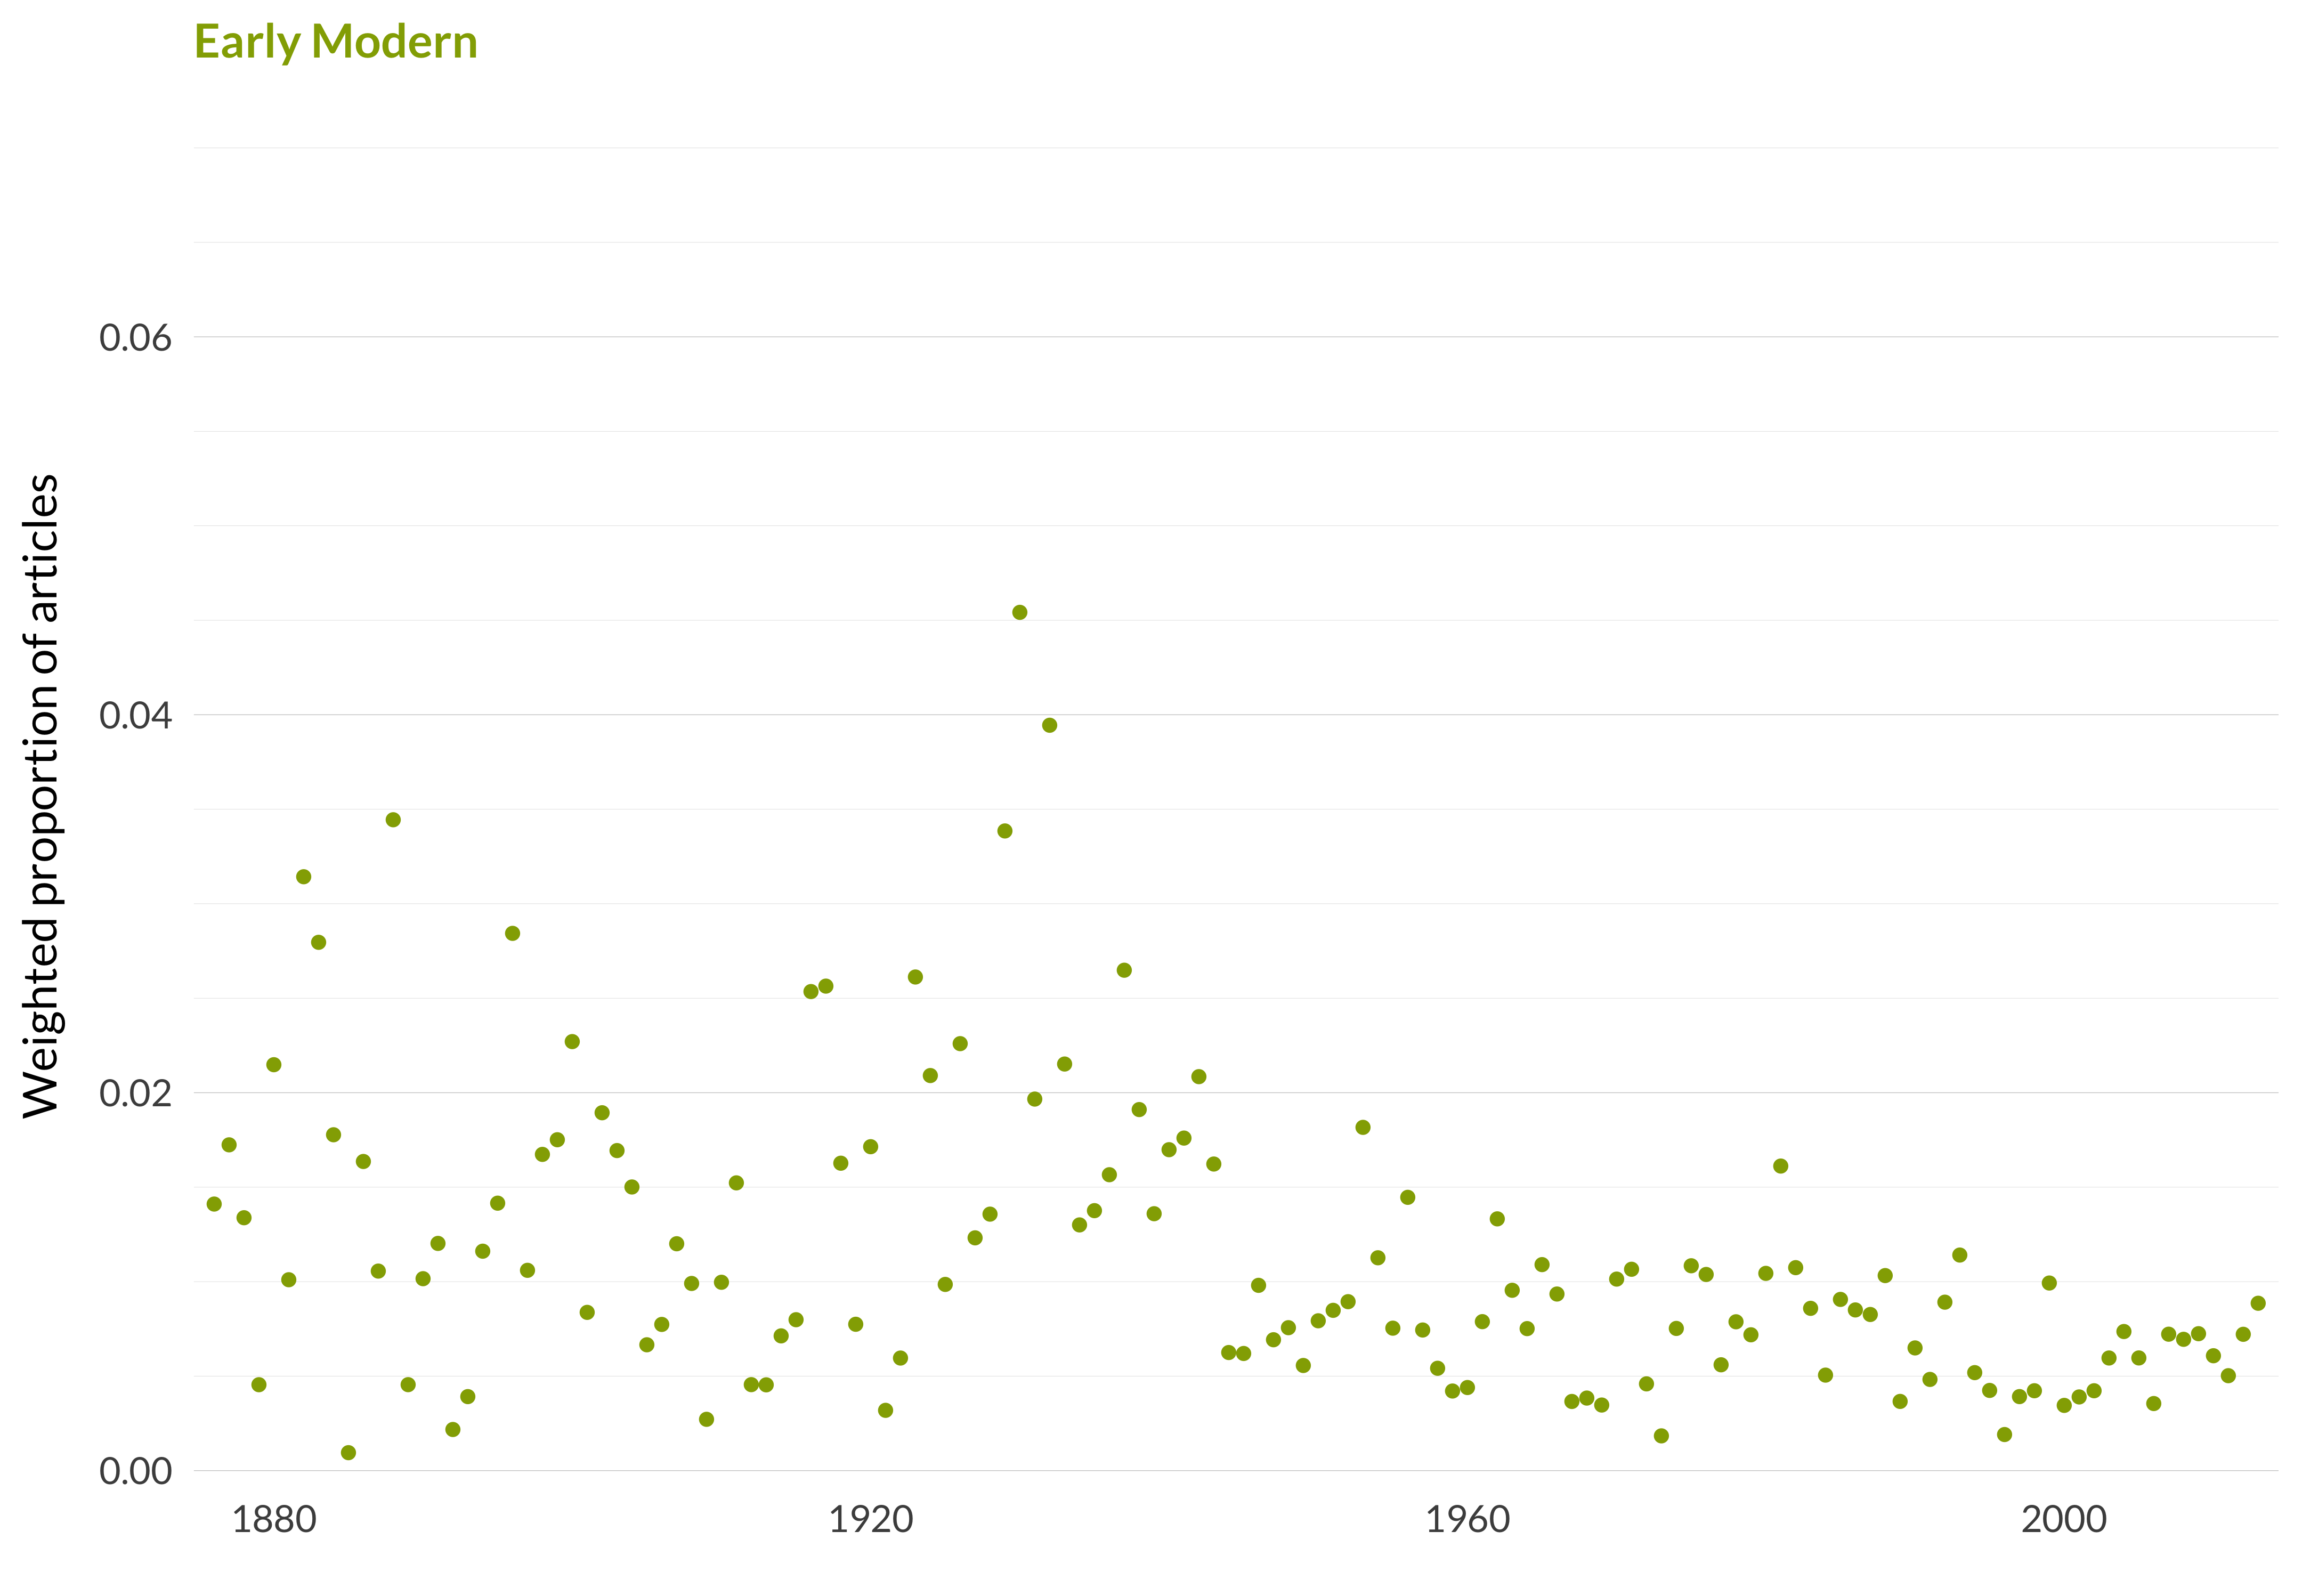 A scatterplot showing which proportion of articles each year are in the early modern topic. The x axis shows the year, the y axis measures the proportion of articles each year in this topic. There is one dot per year. The highest value is in 1930 when 4.5% of articles were in this topic. The lowest value is in 1885 when 0.1% of articles were in this topic. The full table that provides the data for this graph is available in Table A.21 in Appendix A.